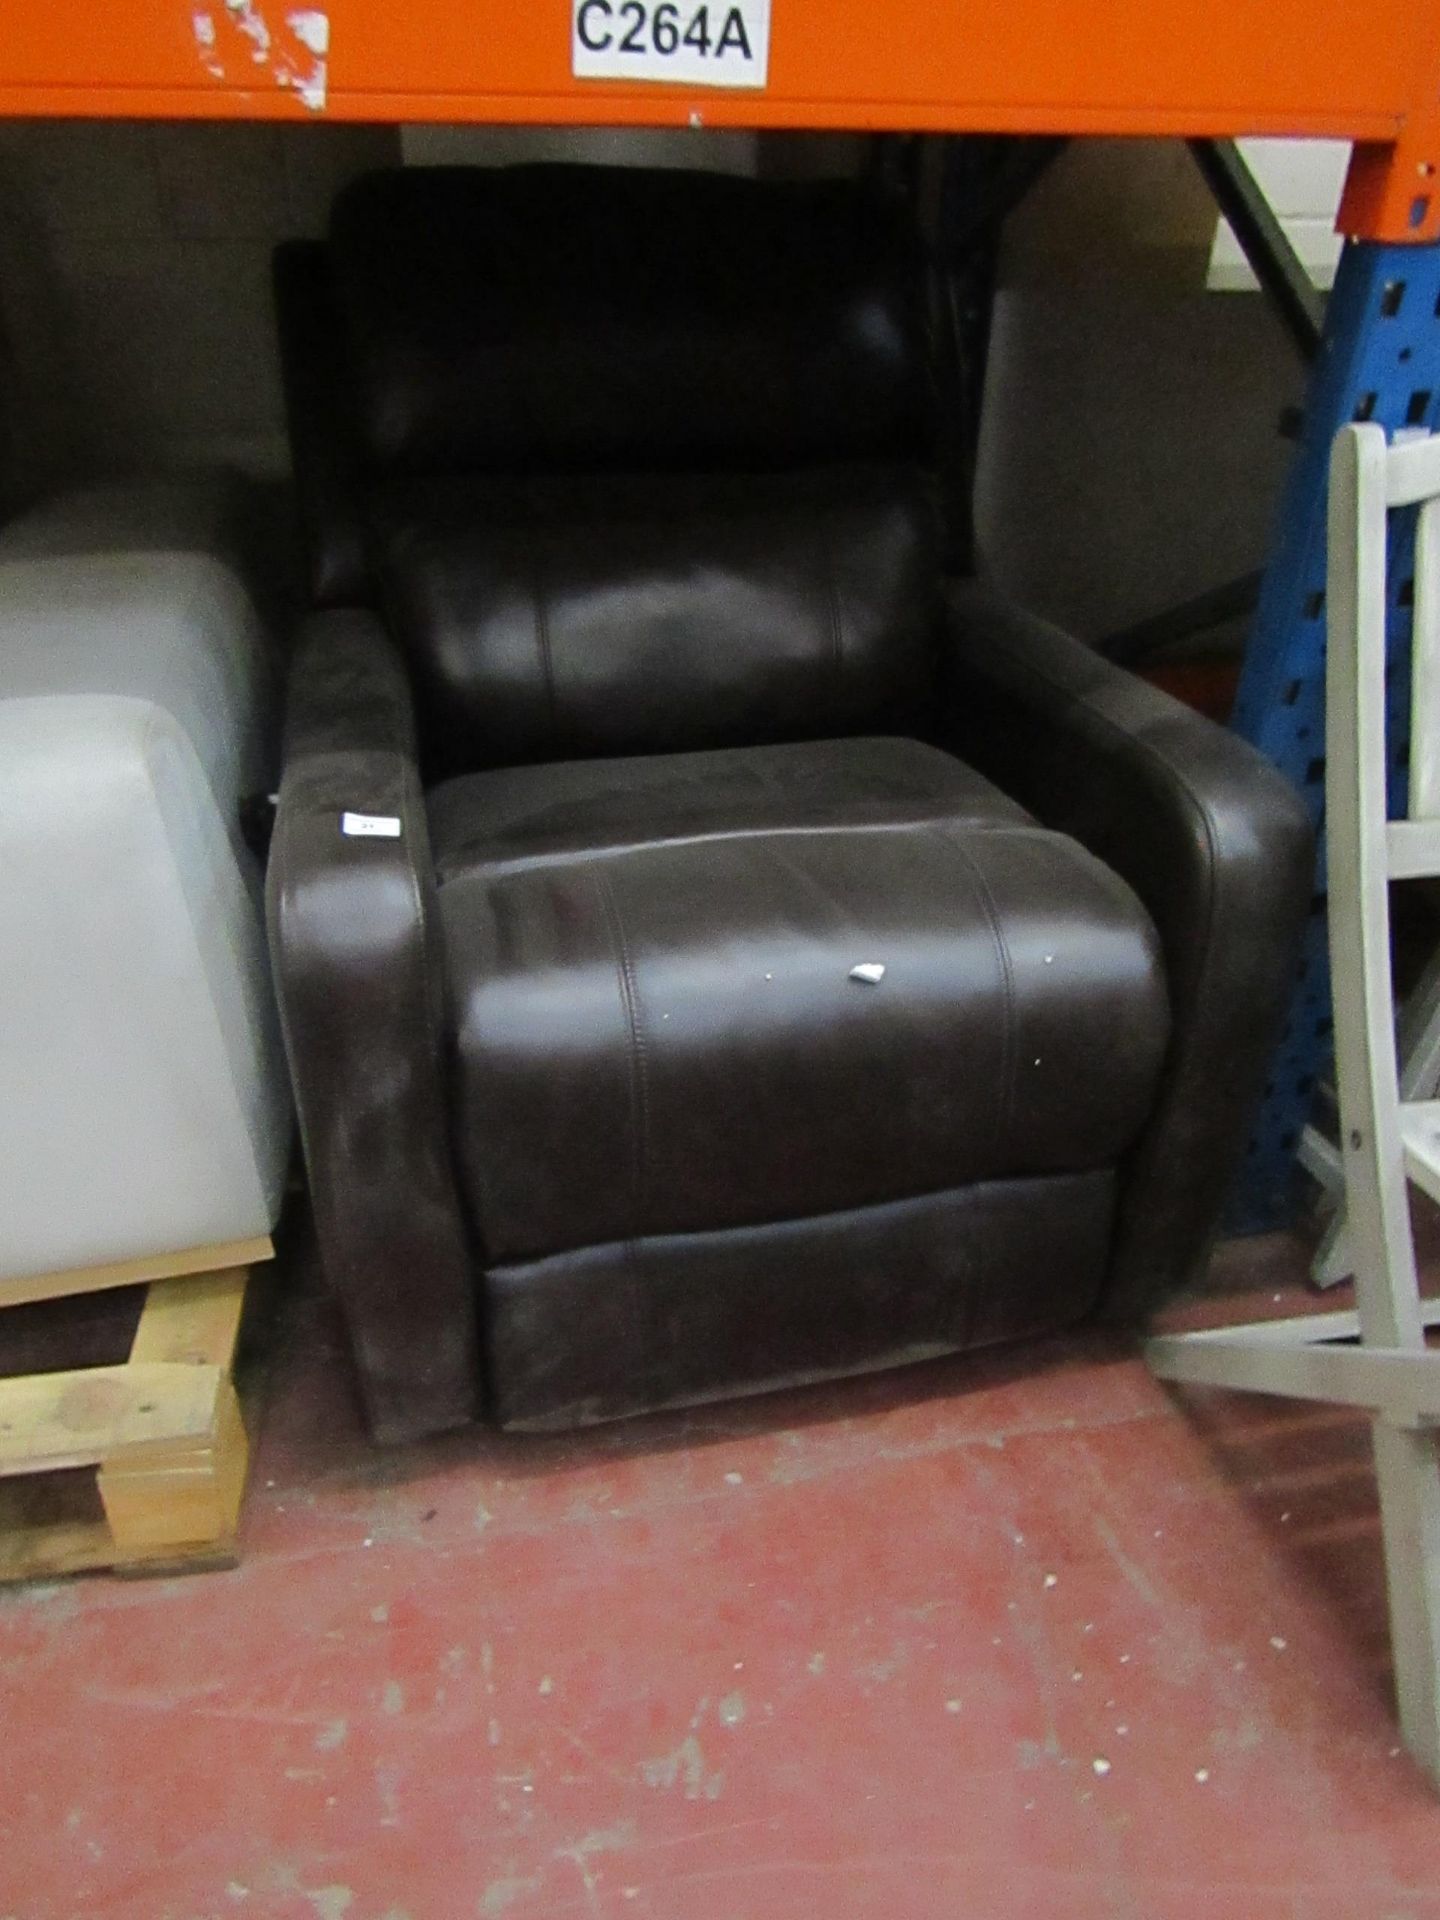 Costco electric reclining, rocking arm chair, unchecked as no power cable